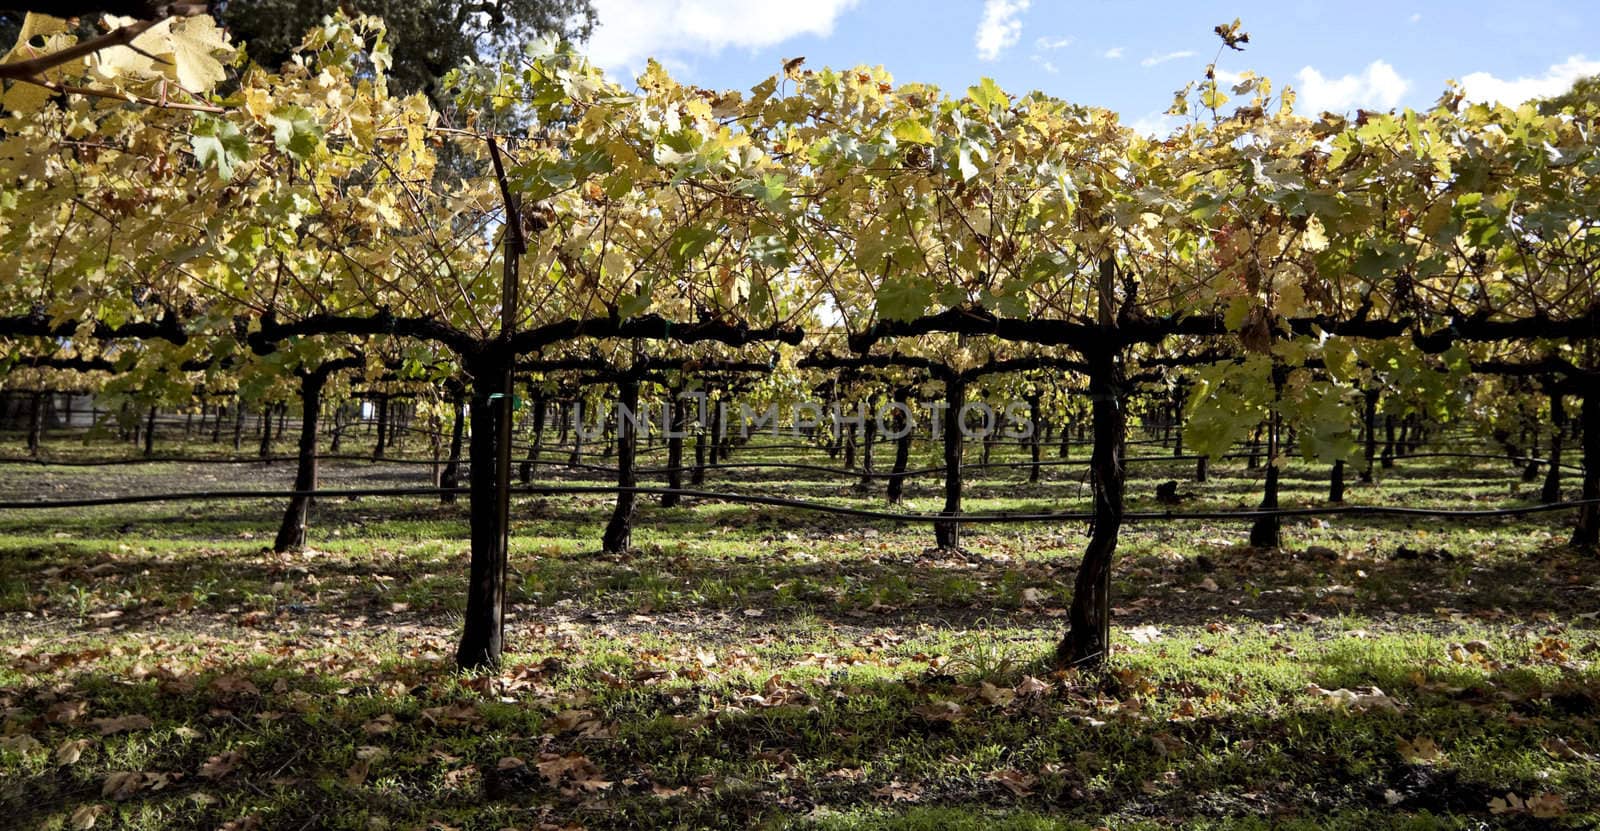 A close view of several grape vines used to make wine